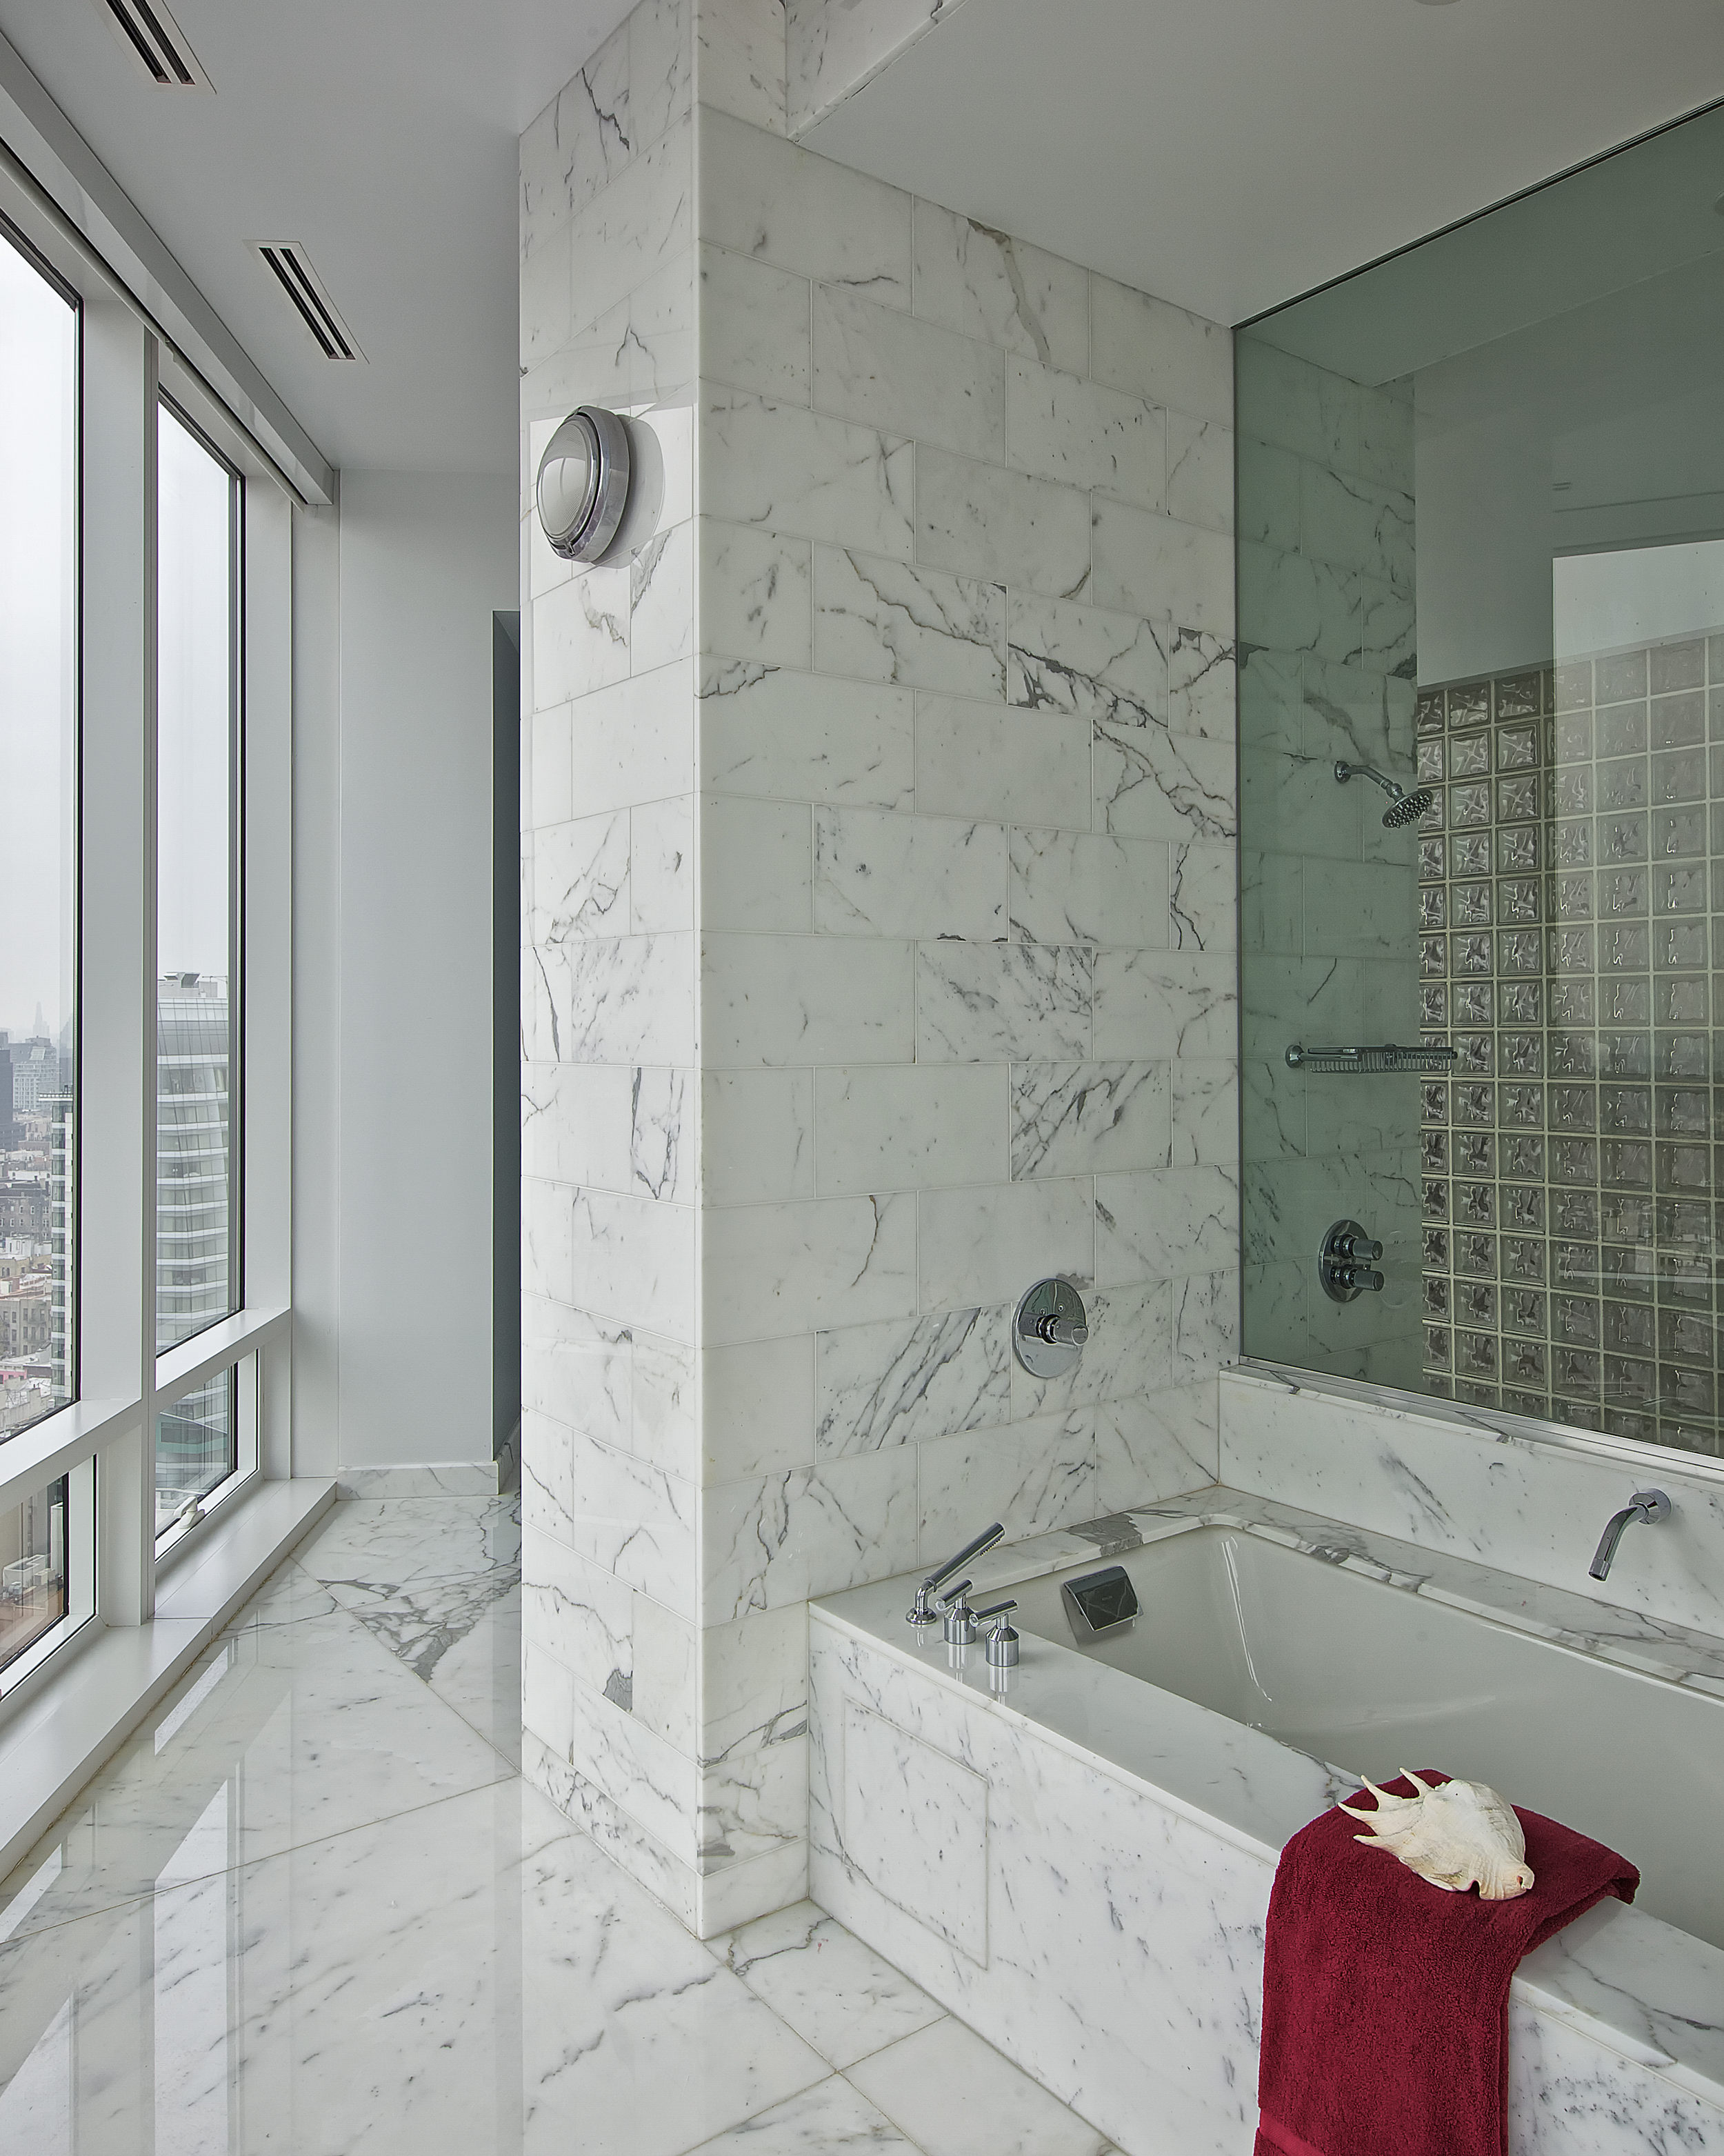   CHELSEA PENTHOUSE   Spend some time in the bathtub of this luxurious bathroom. With the proper lighting, materials, and accessories, it fits into the space perfectly. The glass wall allows the right brightness without ompromising privacy. The batht